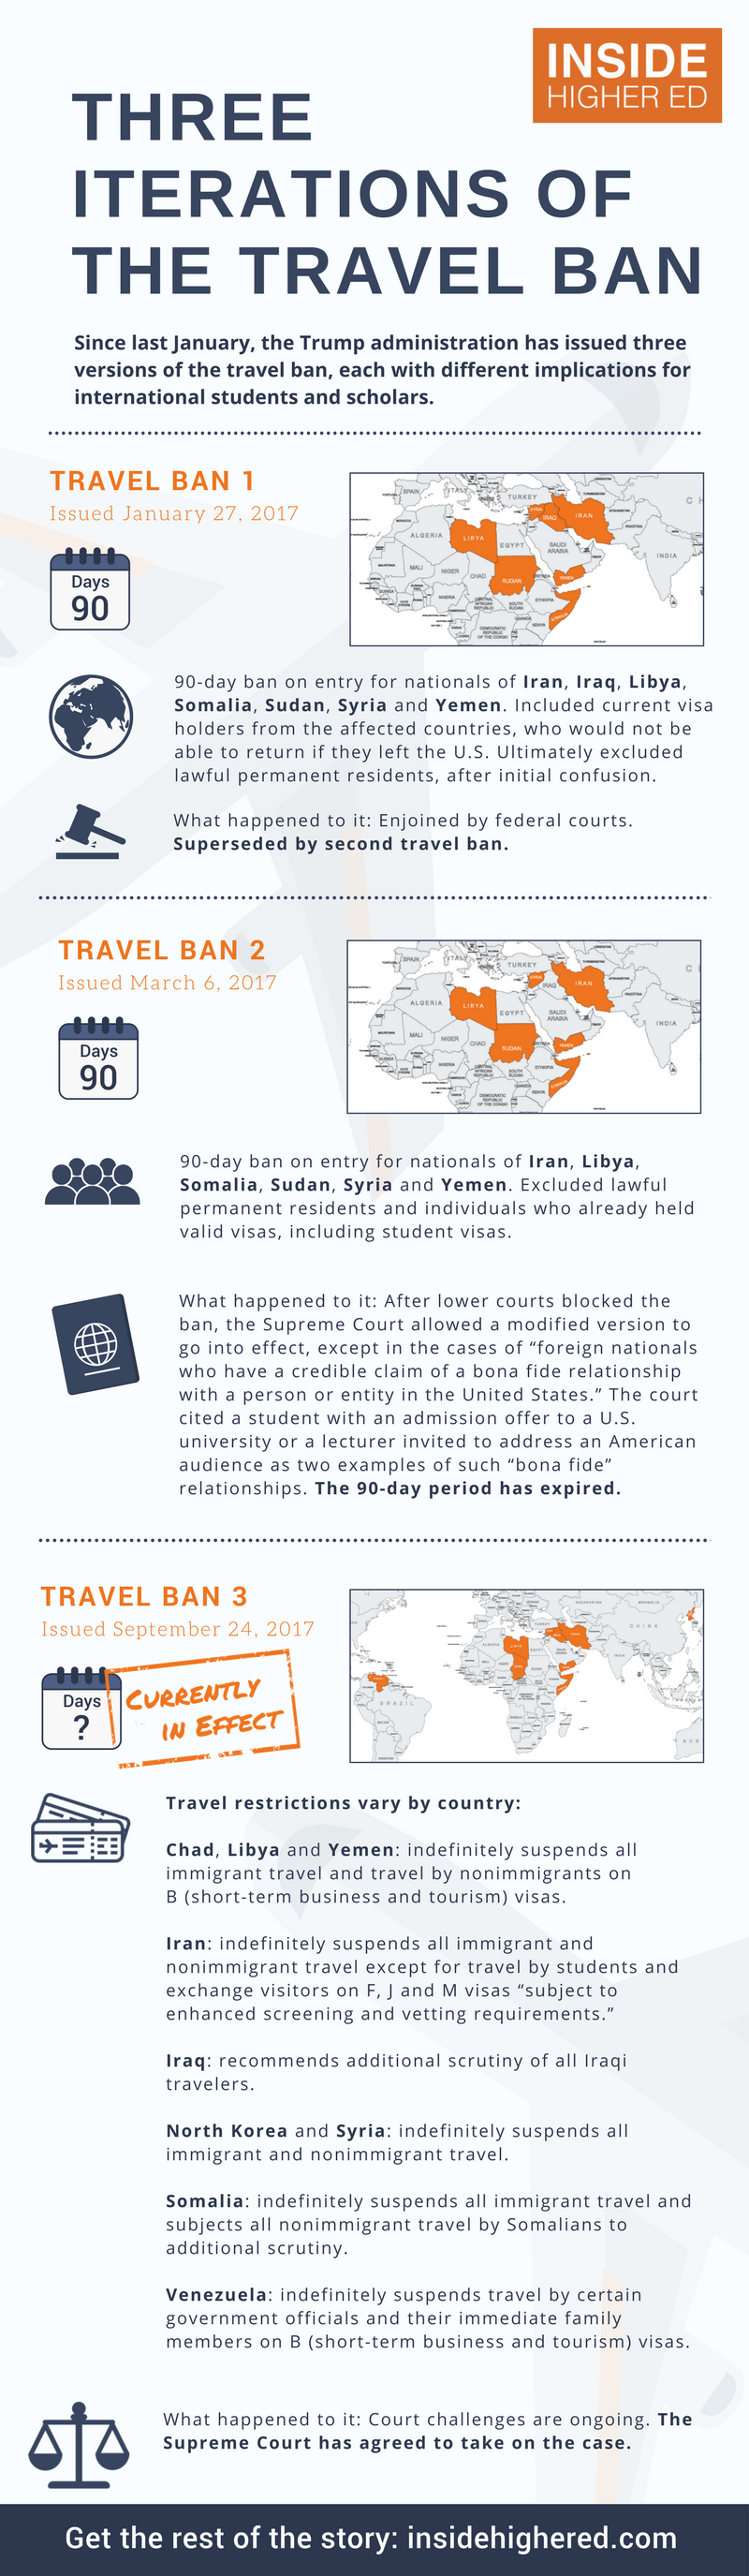 Info graphic: Three Iterations of the Travel Ban. Since last January, the Trump administration has issued three versions of the travel ban, each with different implications for international students and scholars. Travel Ban 1: Issued January 27, 2017. Ninety-day ban on entry for nationals of Iran, Iraq, Libya, Somalia, Sudan, Syria and Yemen. Included current visa holders from the affected countries, who would not be able to return if they left the U.S. Ultimately excluded lawful permanent residents, after initial confusion. What happened to it: Enjoined by federal courts. Superseded by second travel ban. Travel Ban 2: Issued March 6, 2017. Ninety-day ban on entry for nationals of Iran, Libya, Somalia, Sudan, Syria and Yemen. Excluded lawful permanent residents and individuals who already held valid visas, including student visas. What happened to it: After lower courts blocked the ban, the Supreme Court allowed  a modified version to go into effect, except in the cases of “foreign nationals who have a credible claim of a bona fide relationship with a person or entity in the United States.” The court cited a student with an admission offer to a U.S. university or a lecturer invited to address an American audience as two examples of such “bona fide” relationships. The ninety-day period has expired. Travel Ban 3: Issued September 24, 2017. Travel restrictions vary by country. Chad, Libya and Yemen: Indefinitely suspends all immigrant travel and travel by nonimmigrants on B (short-term business and tourism) visas. Iran: Indefinitely suspends all immigrant and nonimmigrant travel except for travel by students and exchange visitors on F, J and M visas “subject to enhanced screening and vetting requirements.” Iraq: recommends additional scrutiny of all Iraqi travelers. North Korea and Syria: indefinitely suspends all immigrant and nonimmigrant travel. Somalia: indefinitely suspends all immigrant travel and subjects all nonimmigrant travel by Somalians to additional scrutiny. Venezuela: indefinitely suspends travel by certain government officials and their immediate family members on B (short-term business and tourism) visas. What happened to it: Court challenges are ongoing. The Supreme Court has agreed to take on the case. Get the rest of the story: insidehighered.com